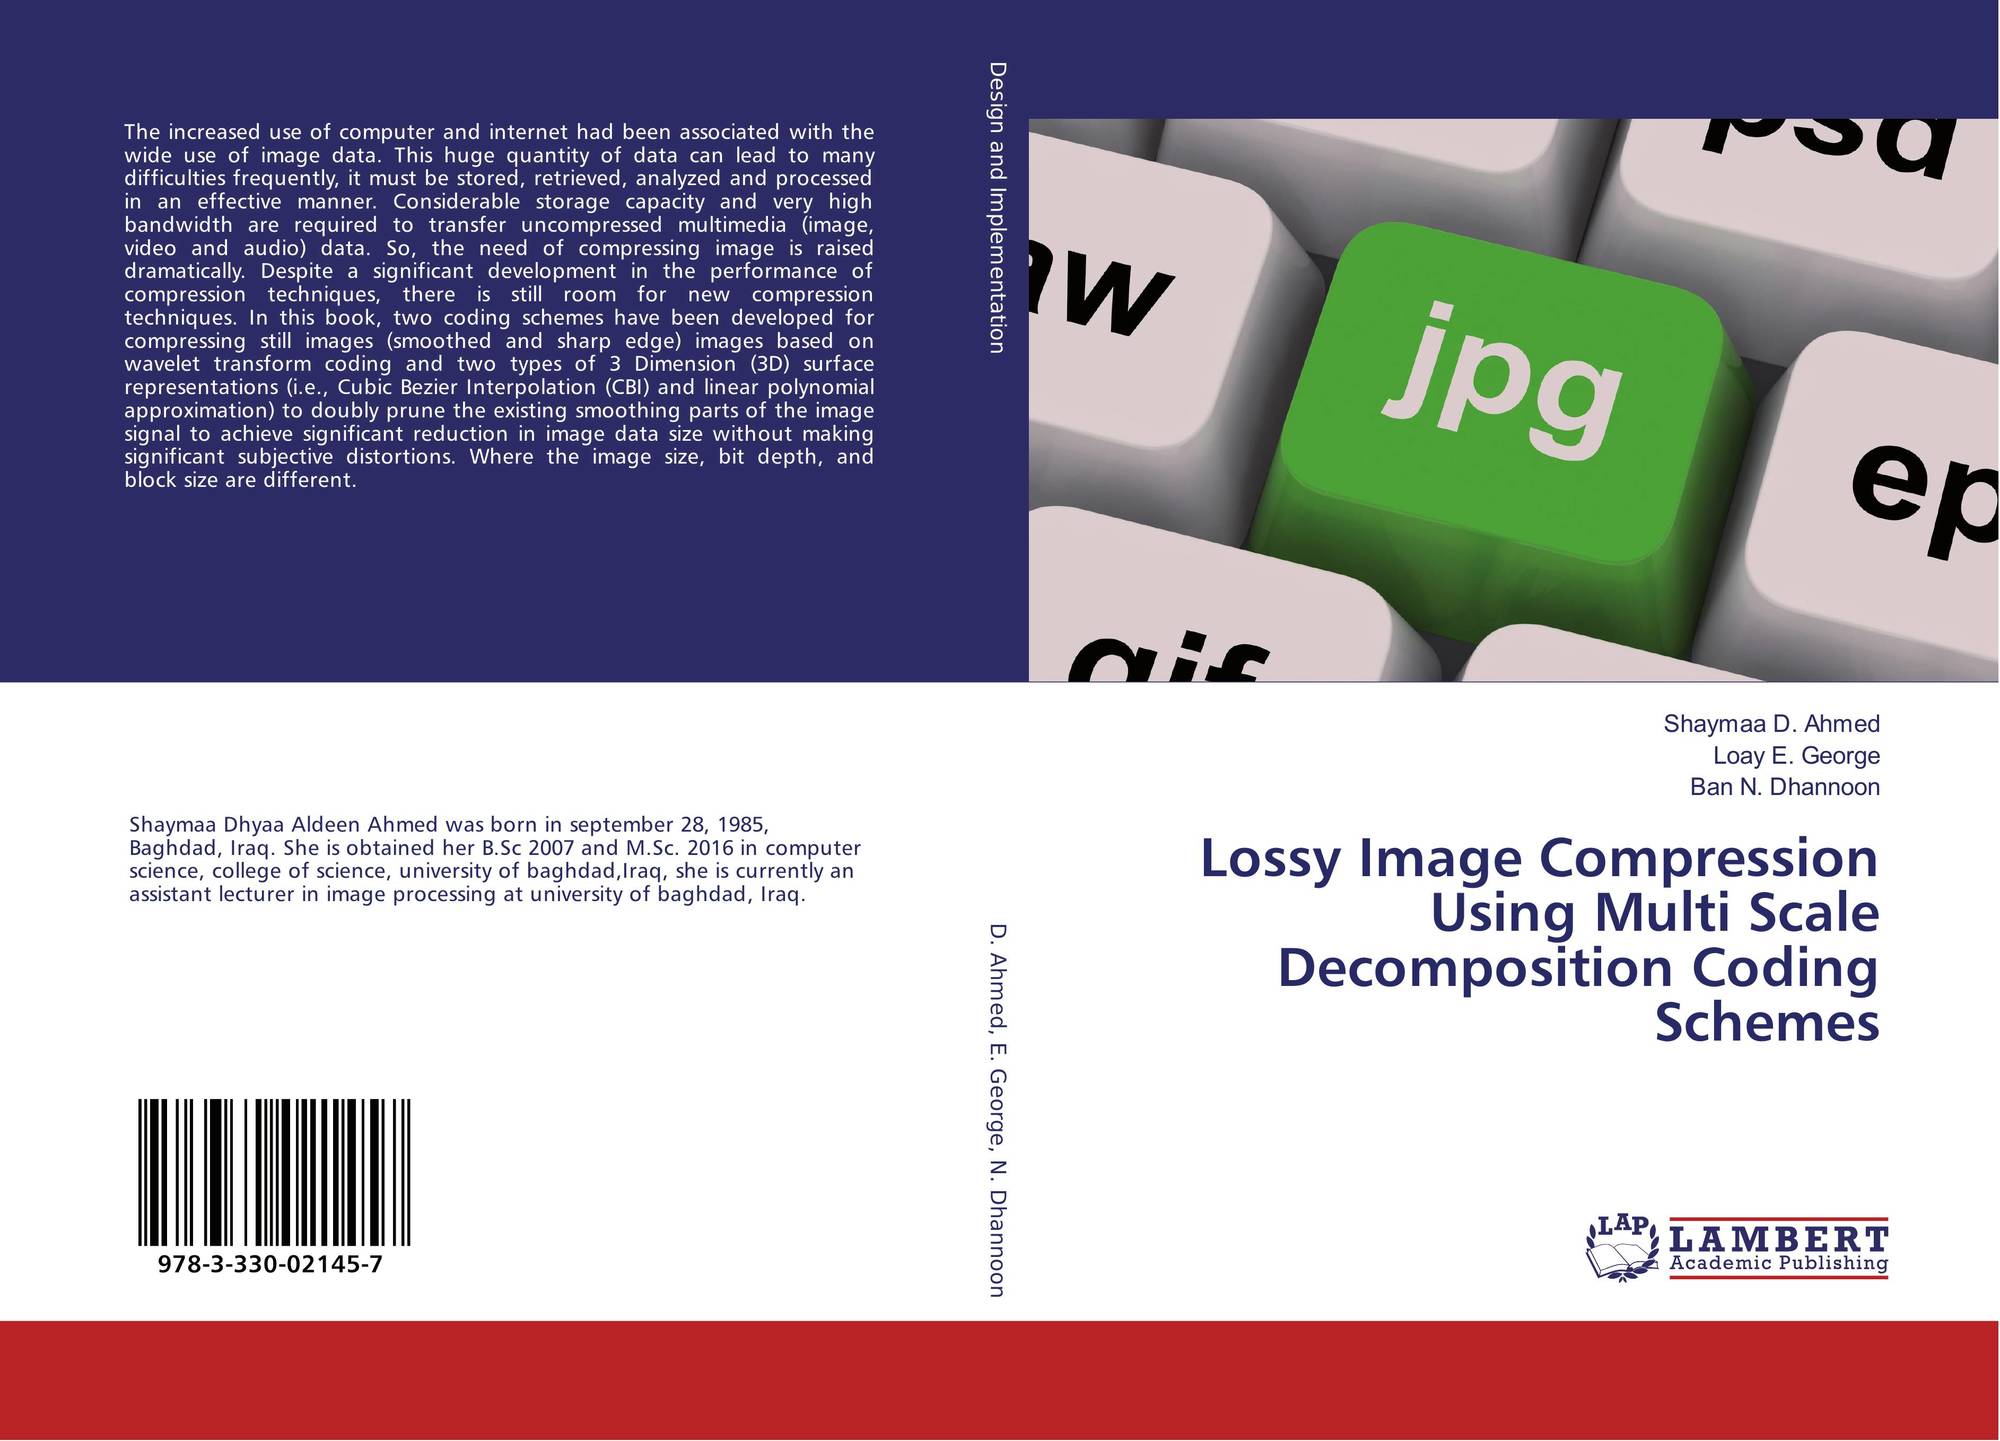 Dotnet add. Php книга. ISBN код. Markup tags. Lossy image Compression Types.